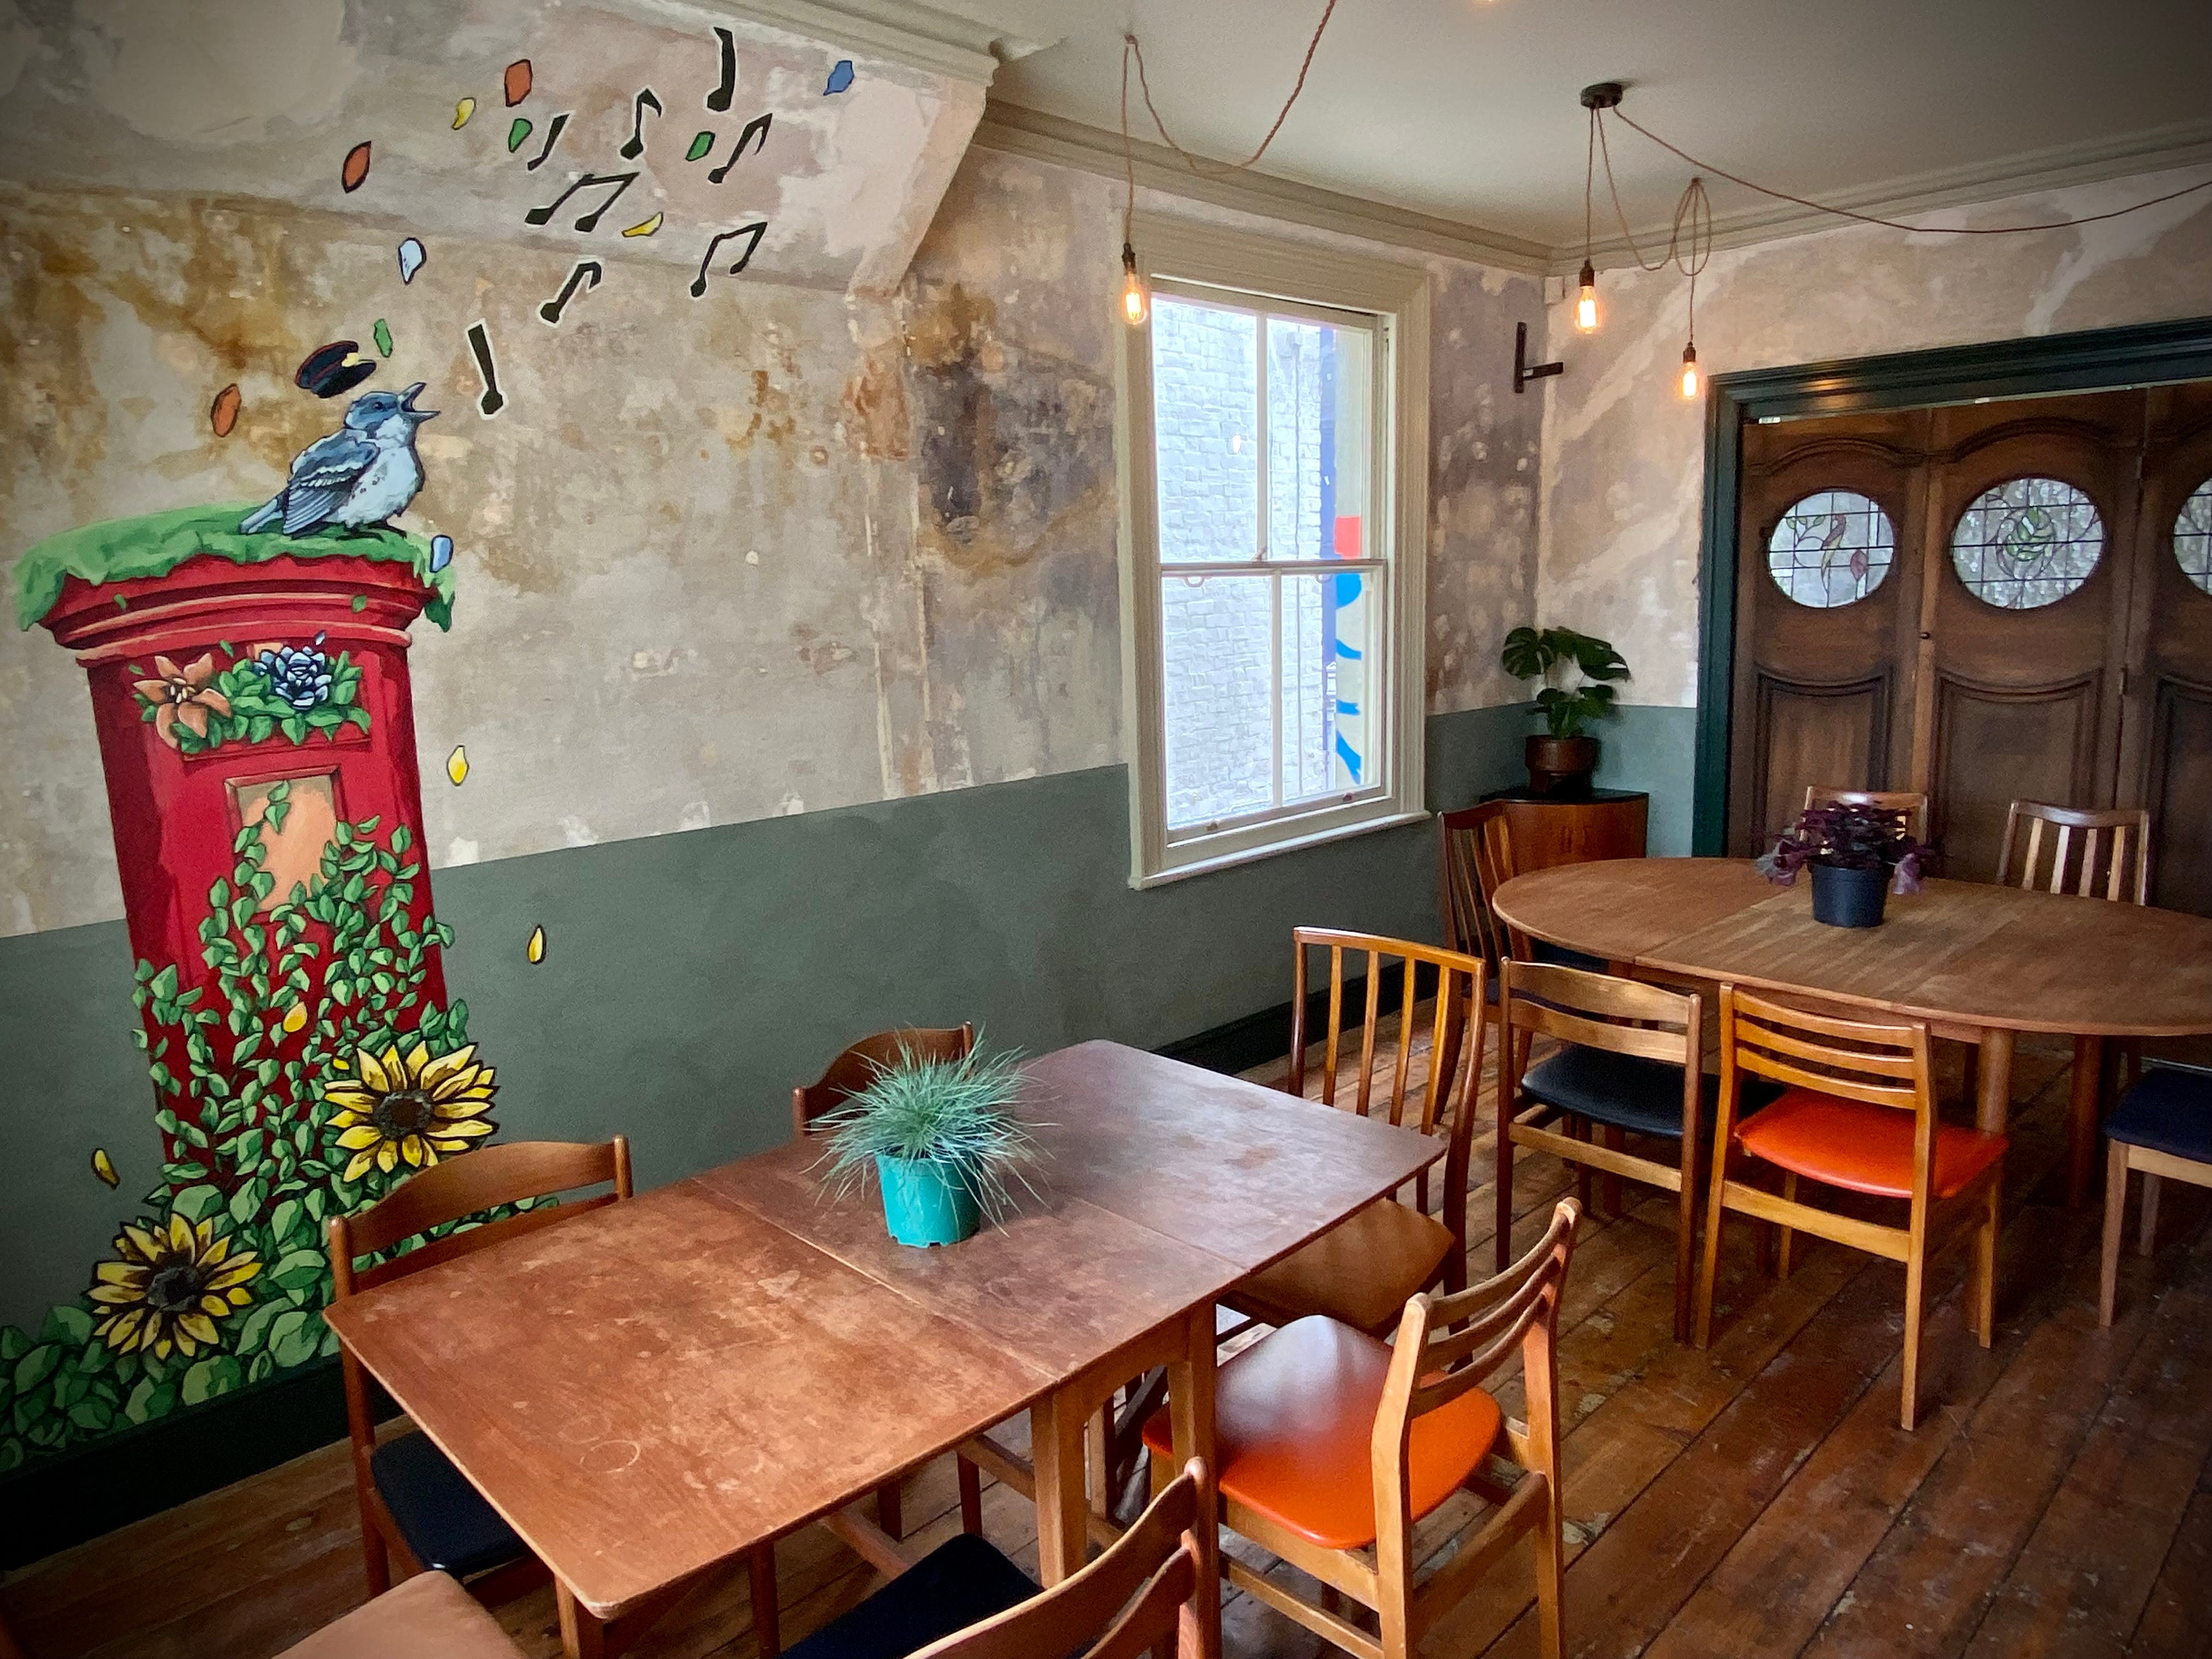 The Post House is one of Brighton’s newer cafes, offering Mediterranean-inspired dishes